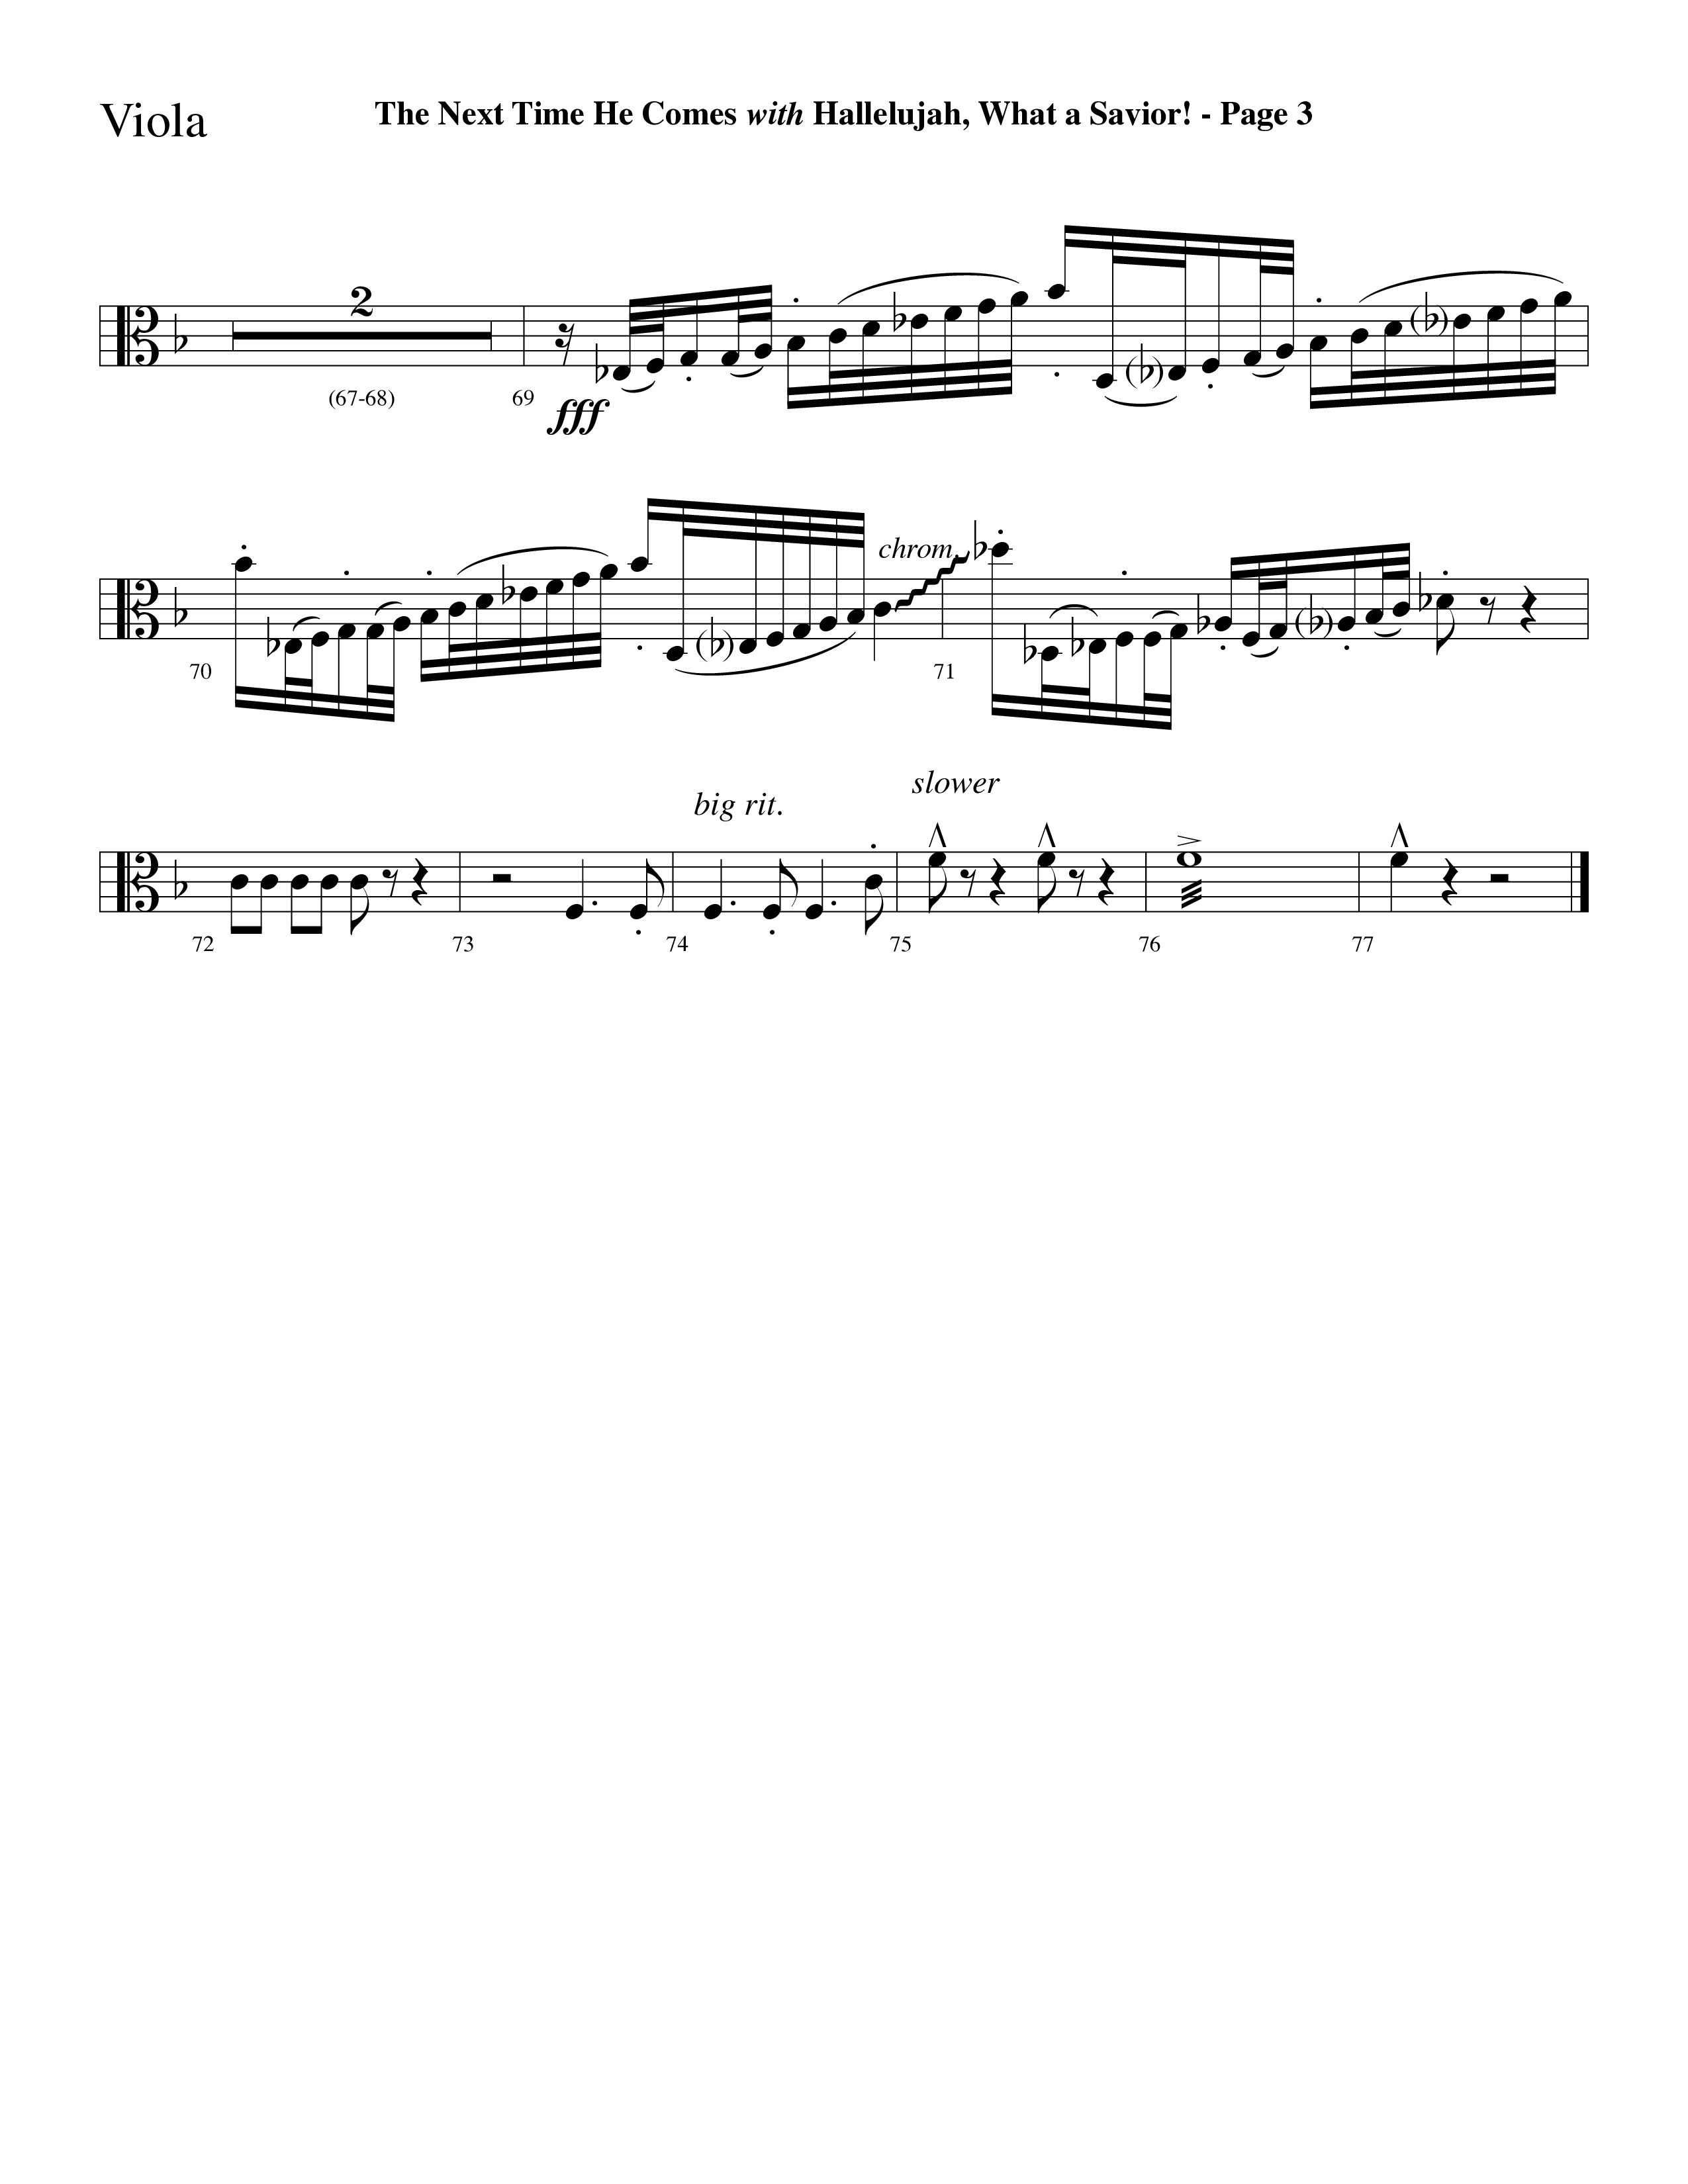 The Next Time He Comes (with Hallelujah What A Savior) (Choral Anthem SATB) Viola (Lifeway Choral / Arr. Dave Williamson)